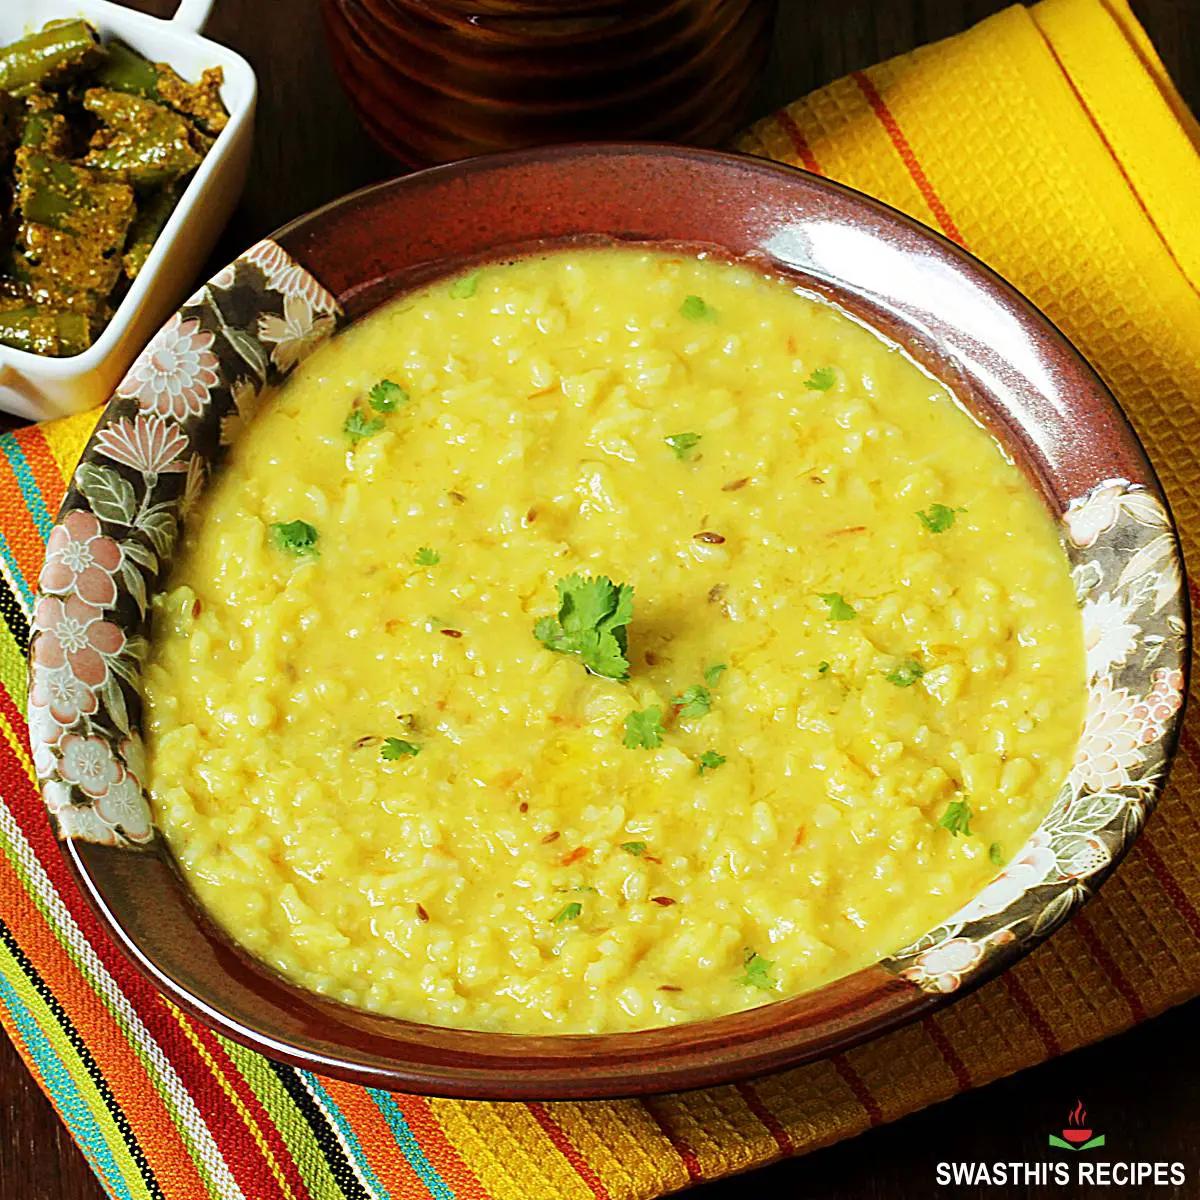 khichdi recipe made with moong dal, rice and spices